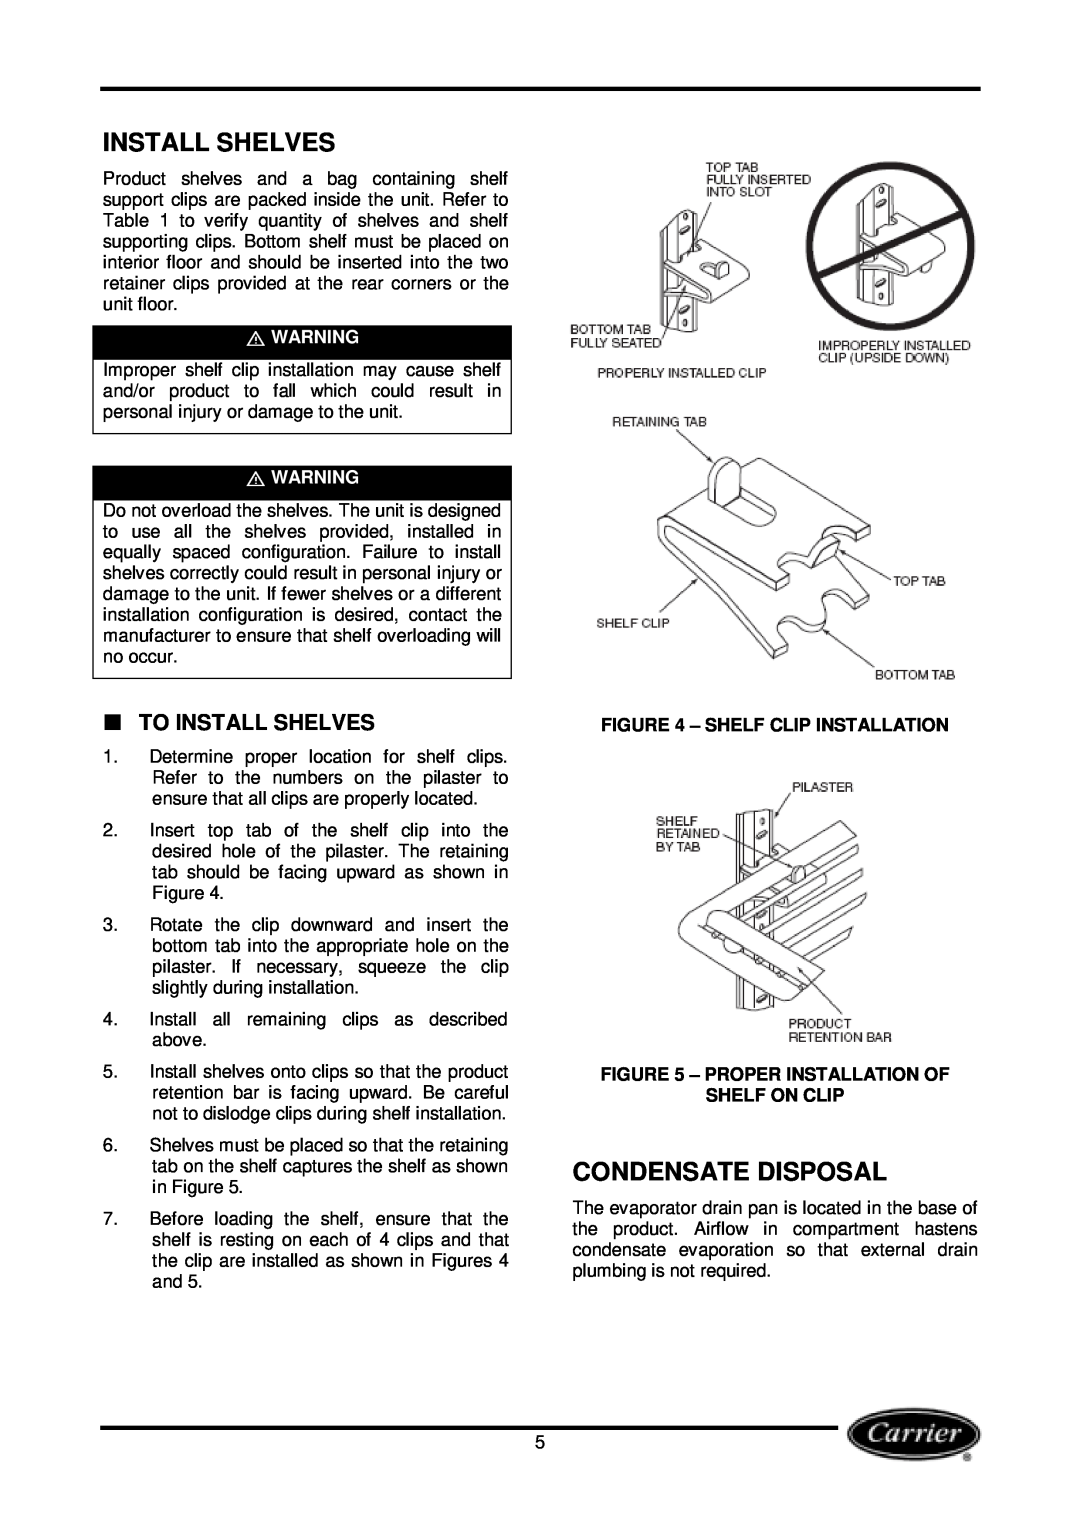 Carrier Miracool owner manual Condensate Disposal, To Install Shelves, Shelf Clip Installation 